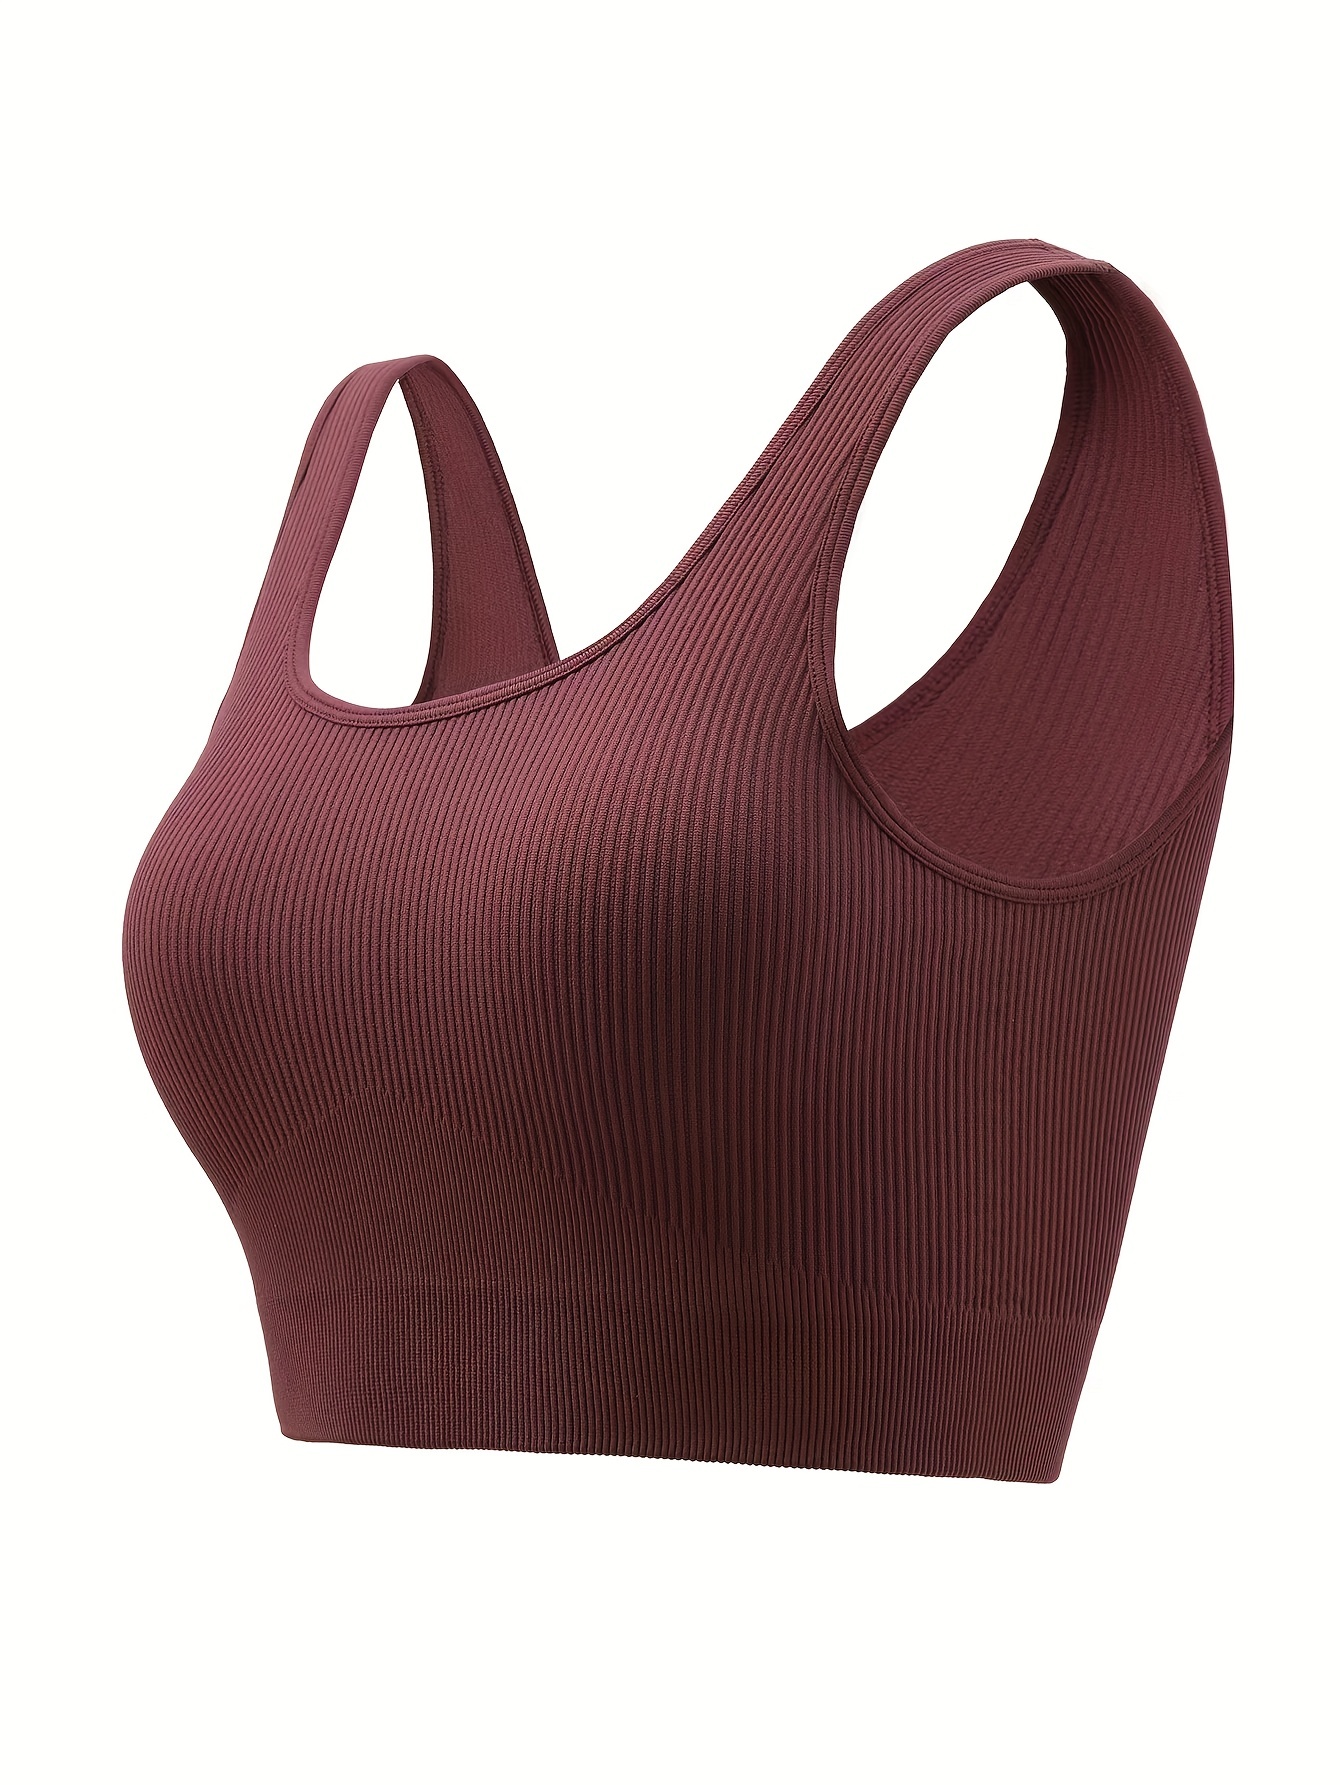 U Back Plus Size Sports Bra High Impact Solid Removable Pads